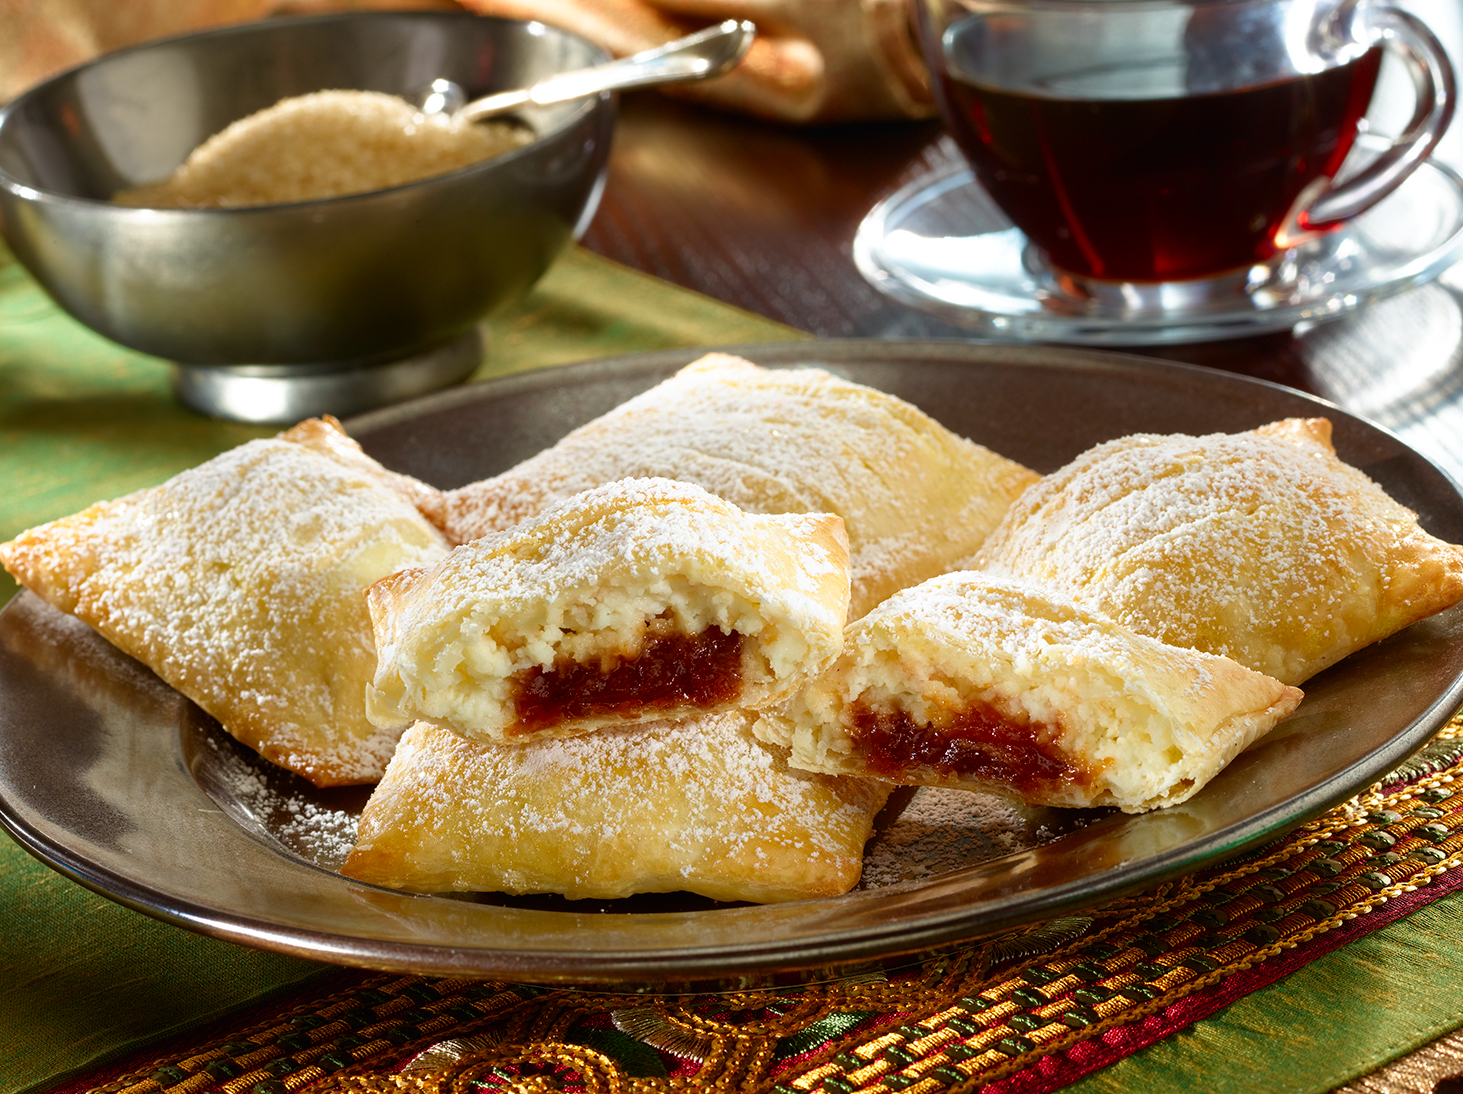 Pastelitos - Guava and Cheese Pastries